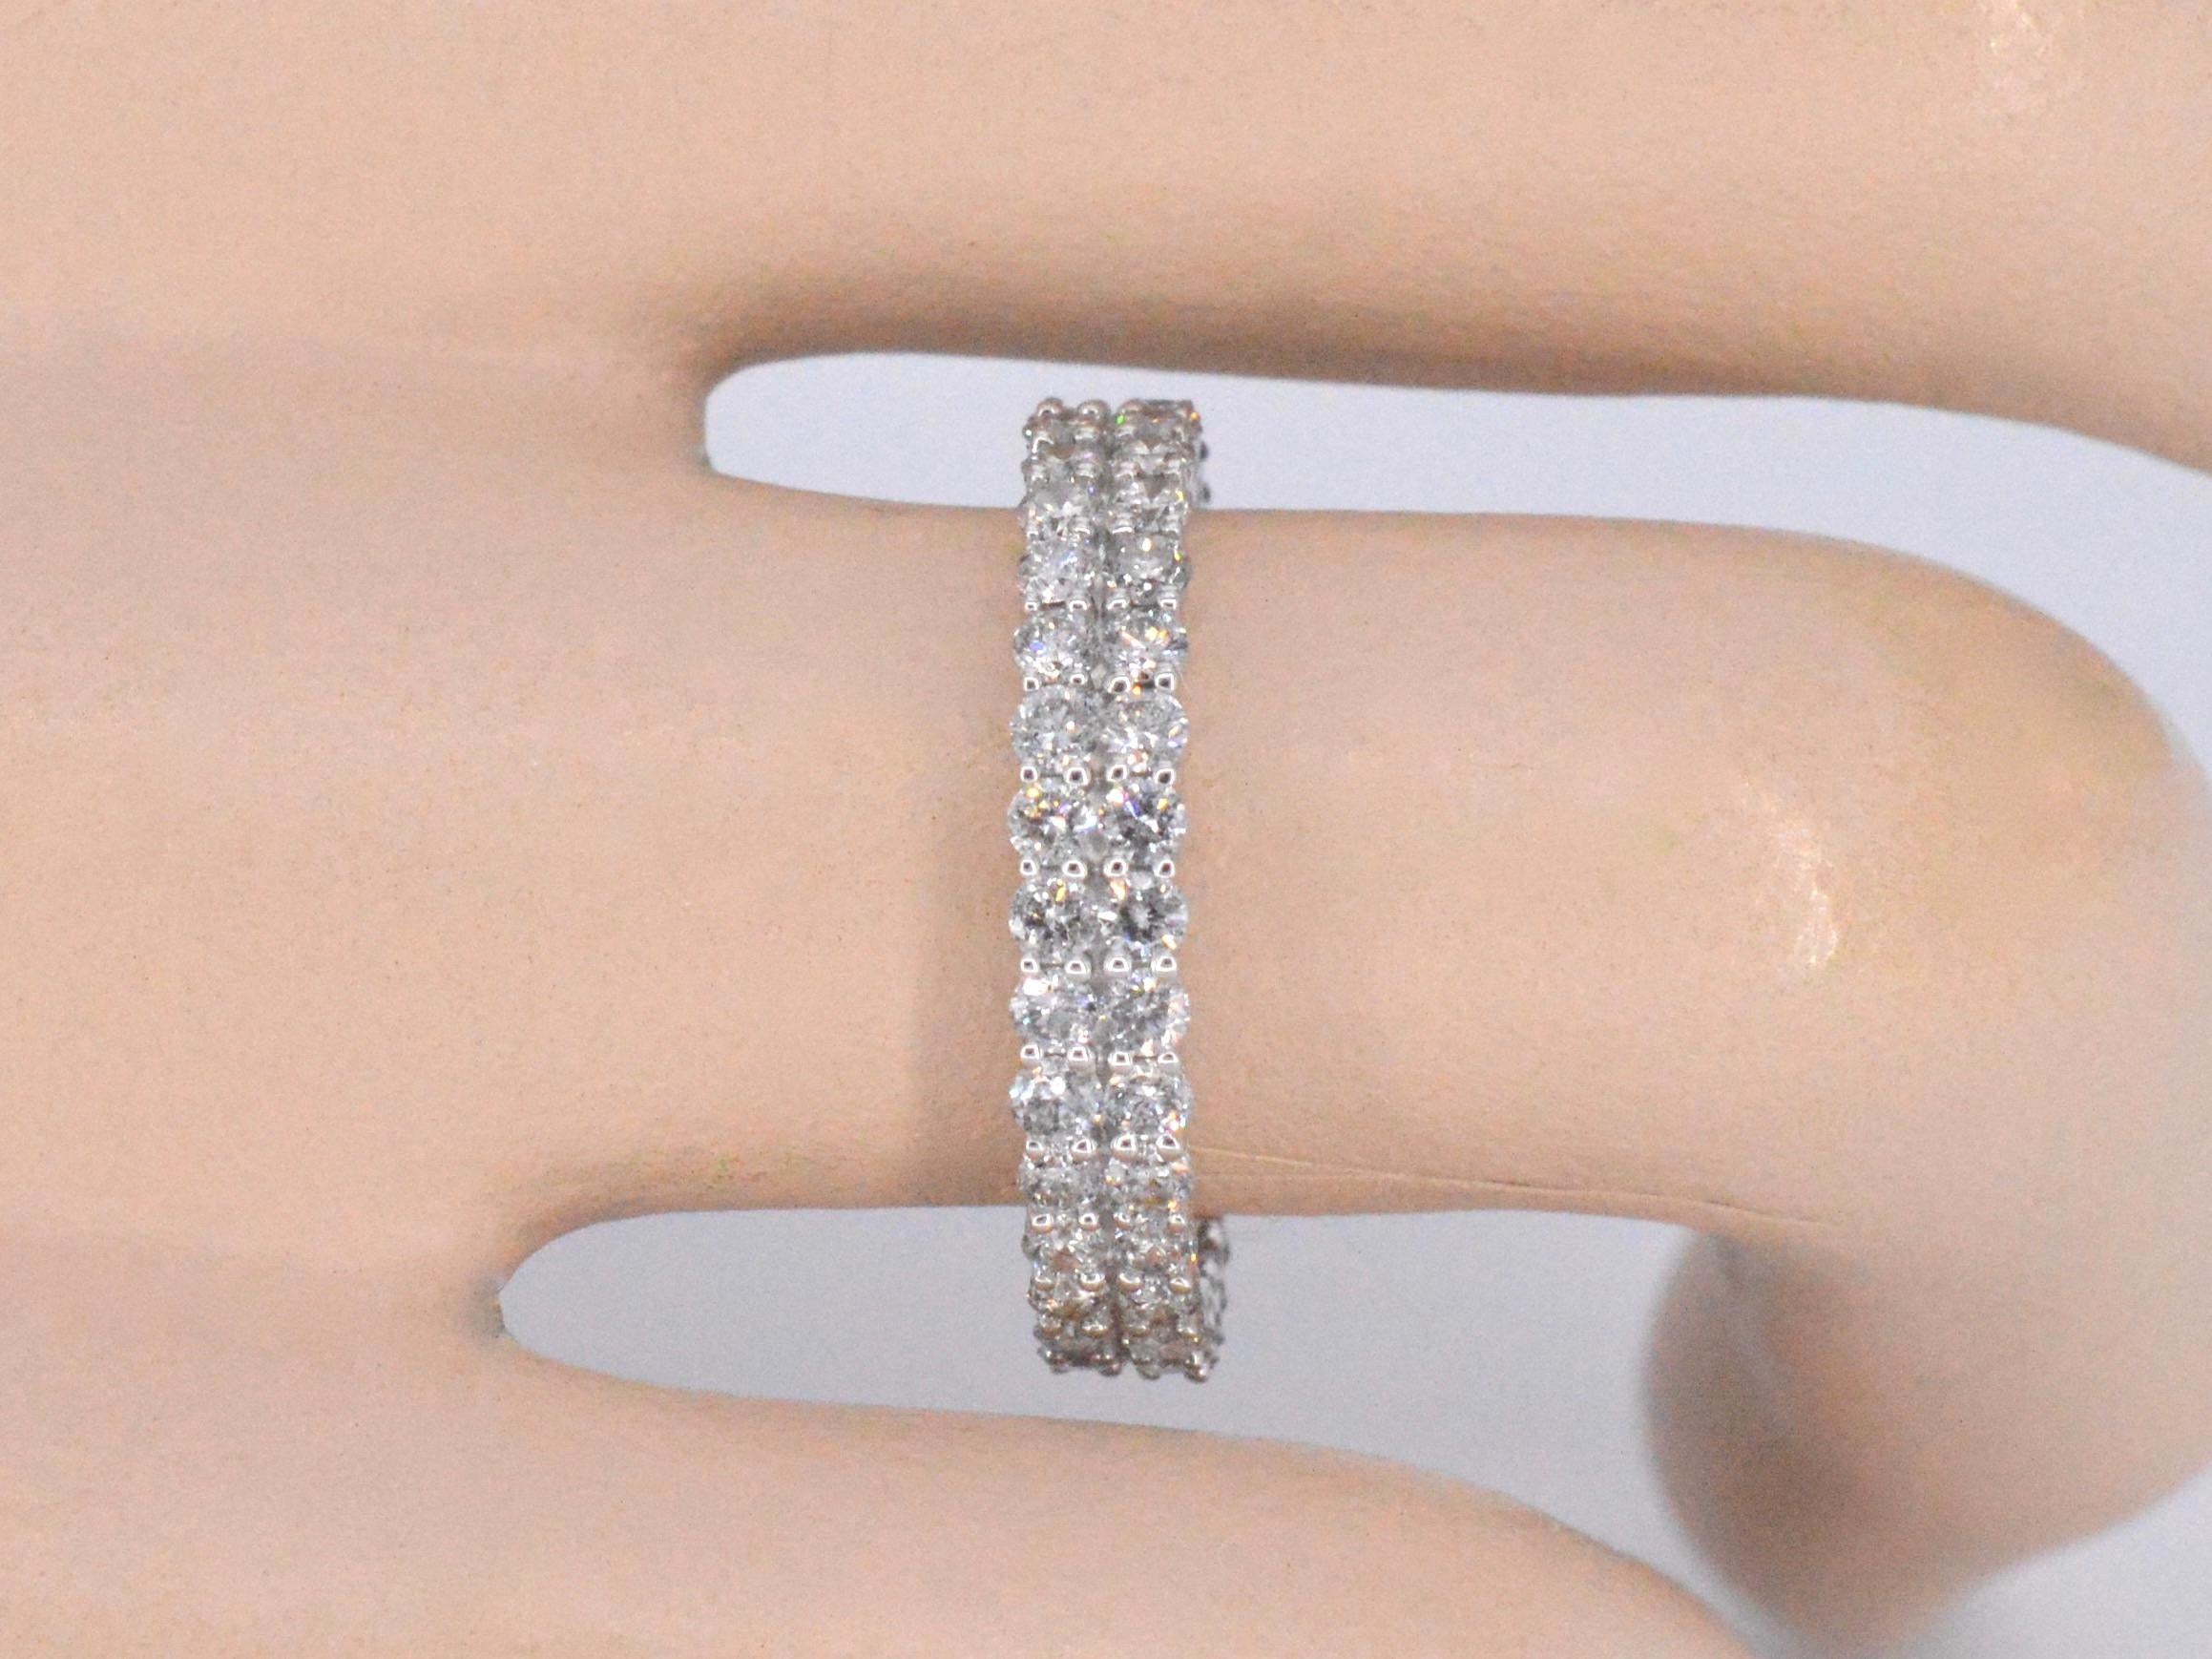 A white golden double eternity ring with diamonds is a stunning piece of jewelry that features two bands of yellow gold, each adorned with diamonds that encircle the entire band. The diamonds are typically matched in size and quality to create a